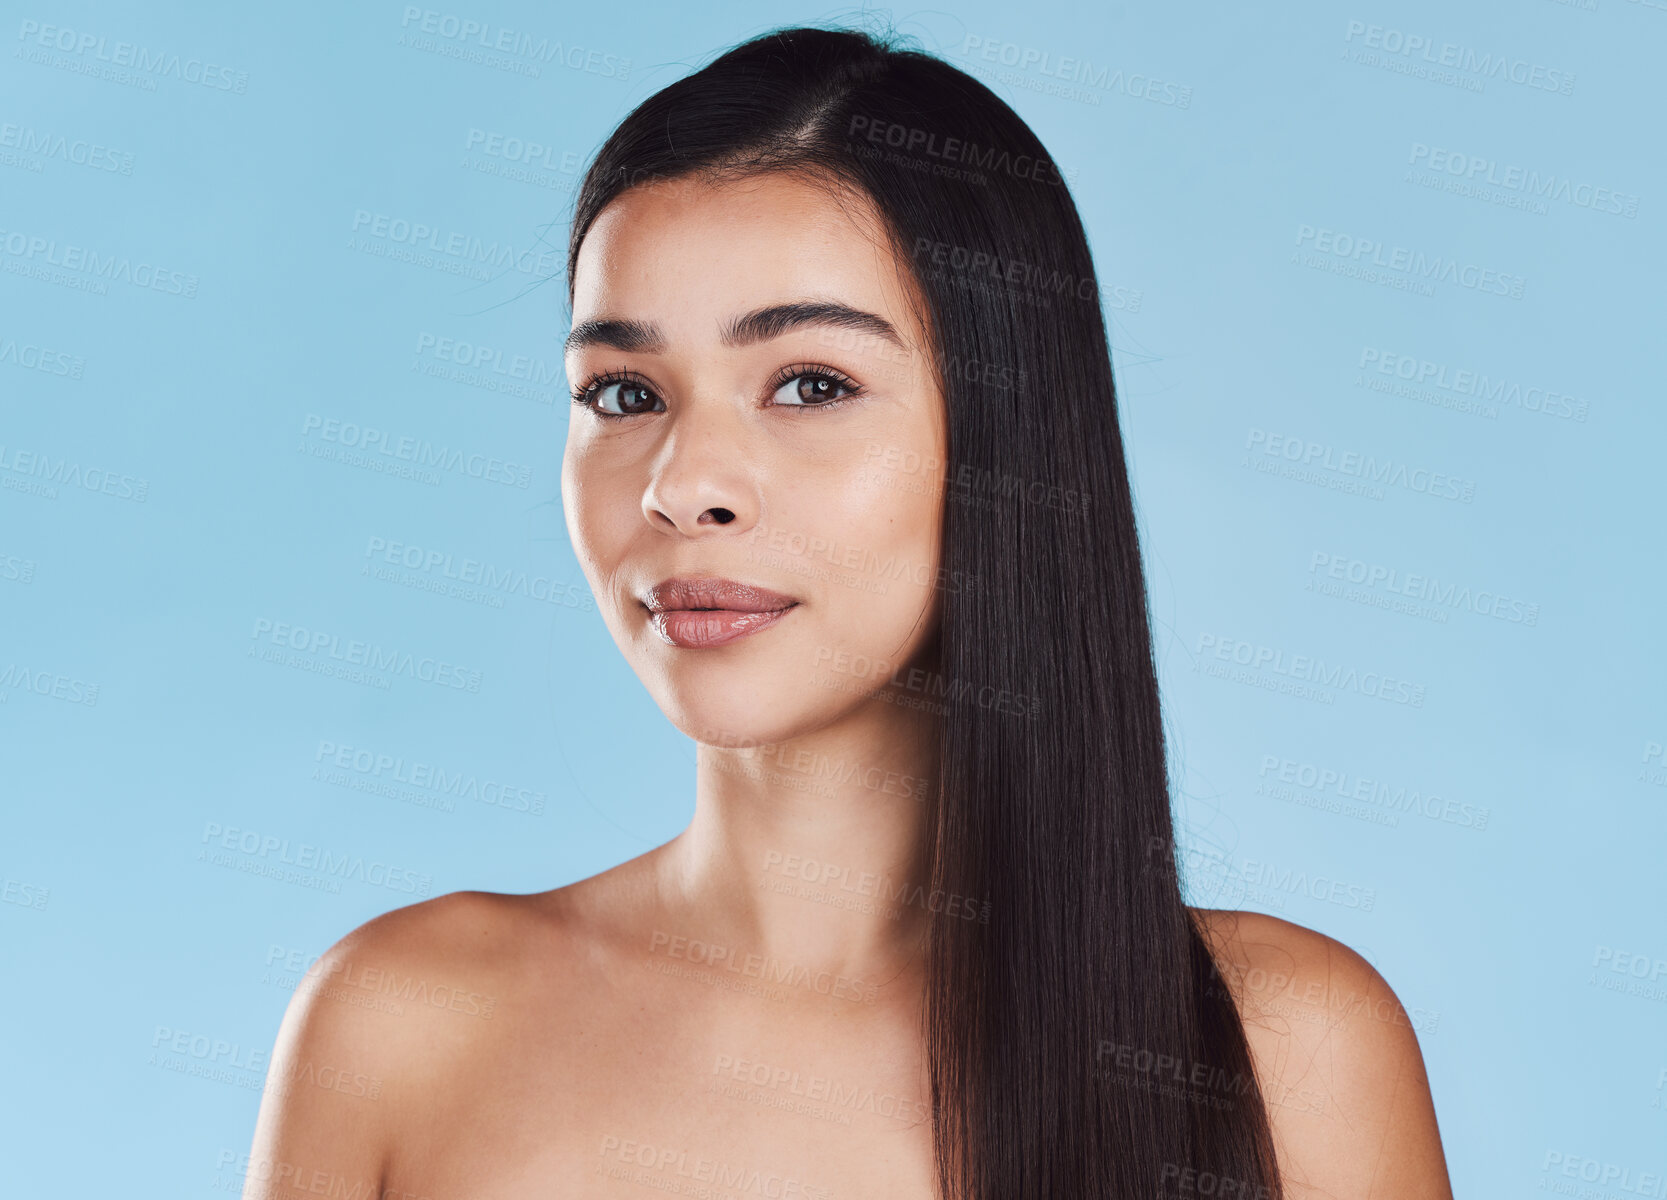 Buy stock photo Portrait of one beautiful young hispanic woman with healthy skin and sleek long hair posing against a blue studio background. Mixed race model with flawless complexion and natural beauty